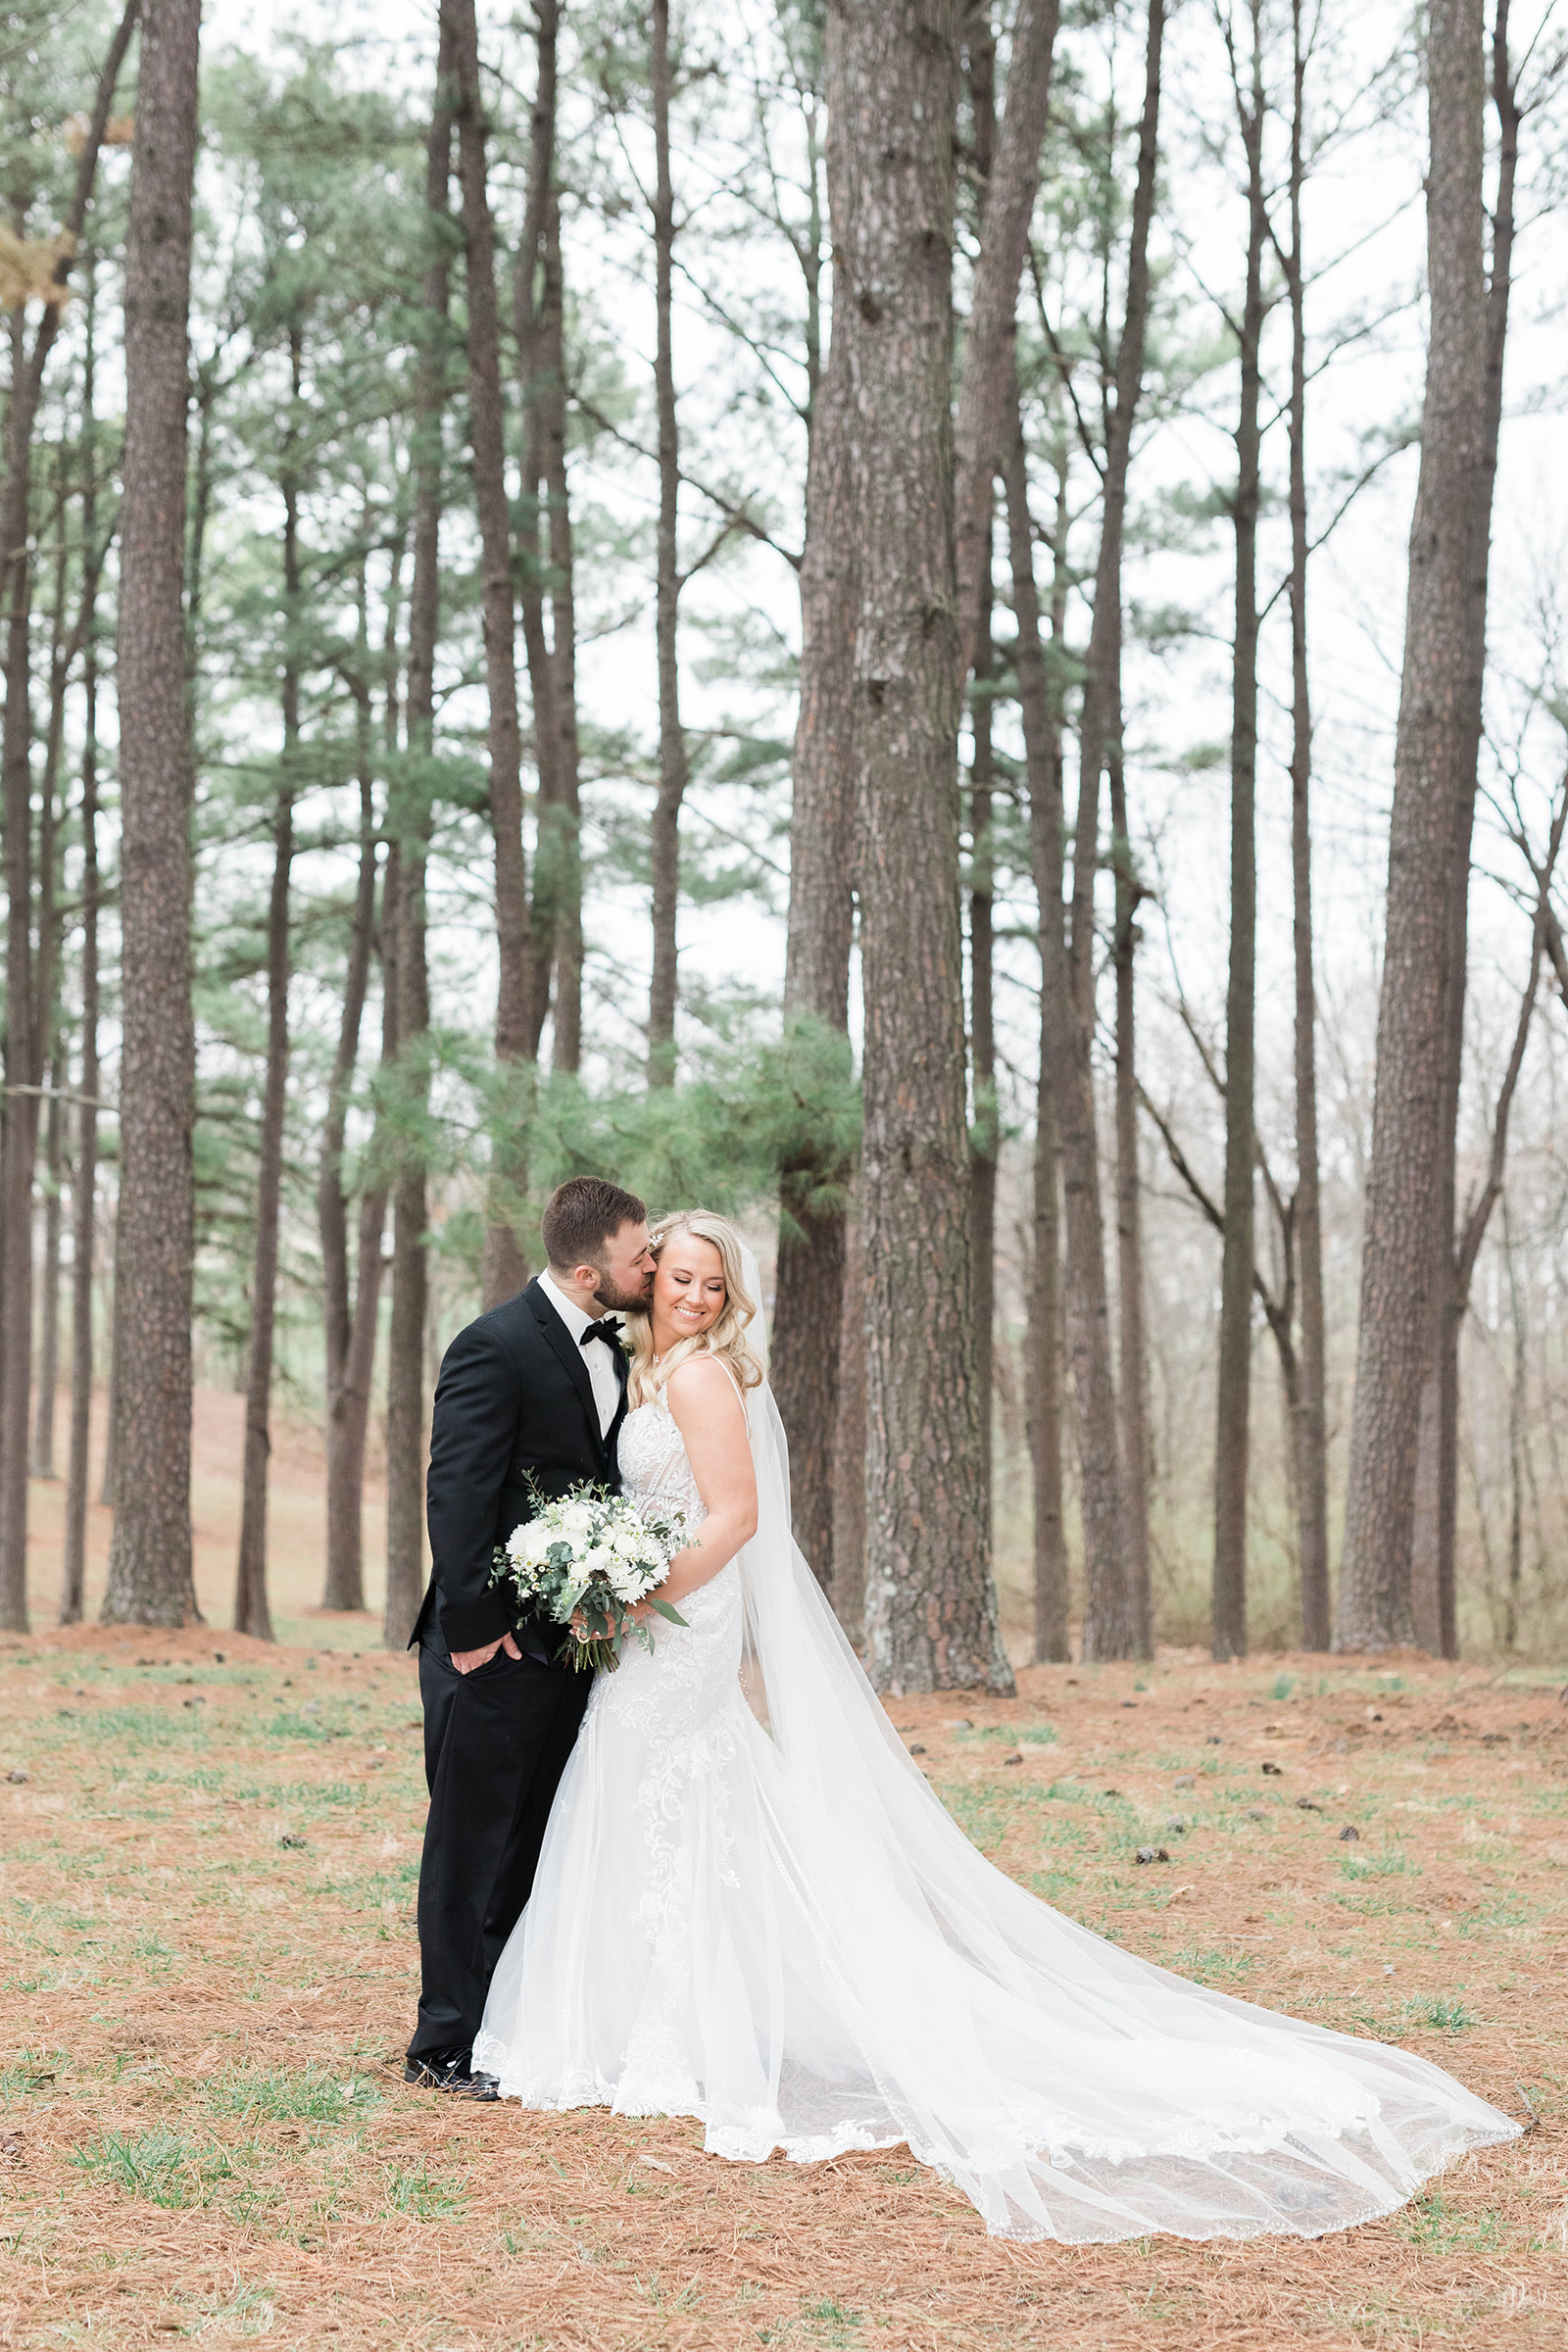 Bride and groom photos in pine trees in Waterloo, IL